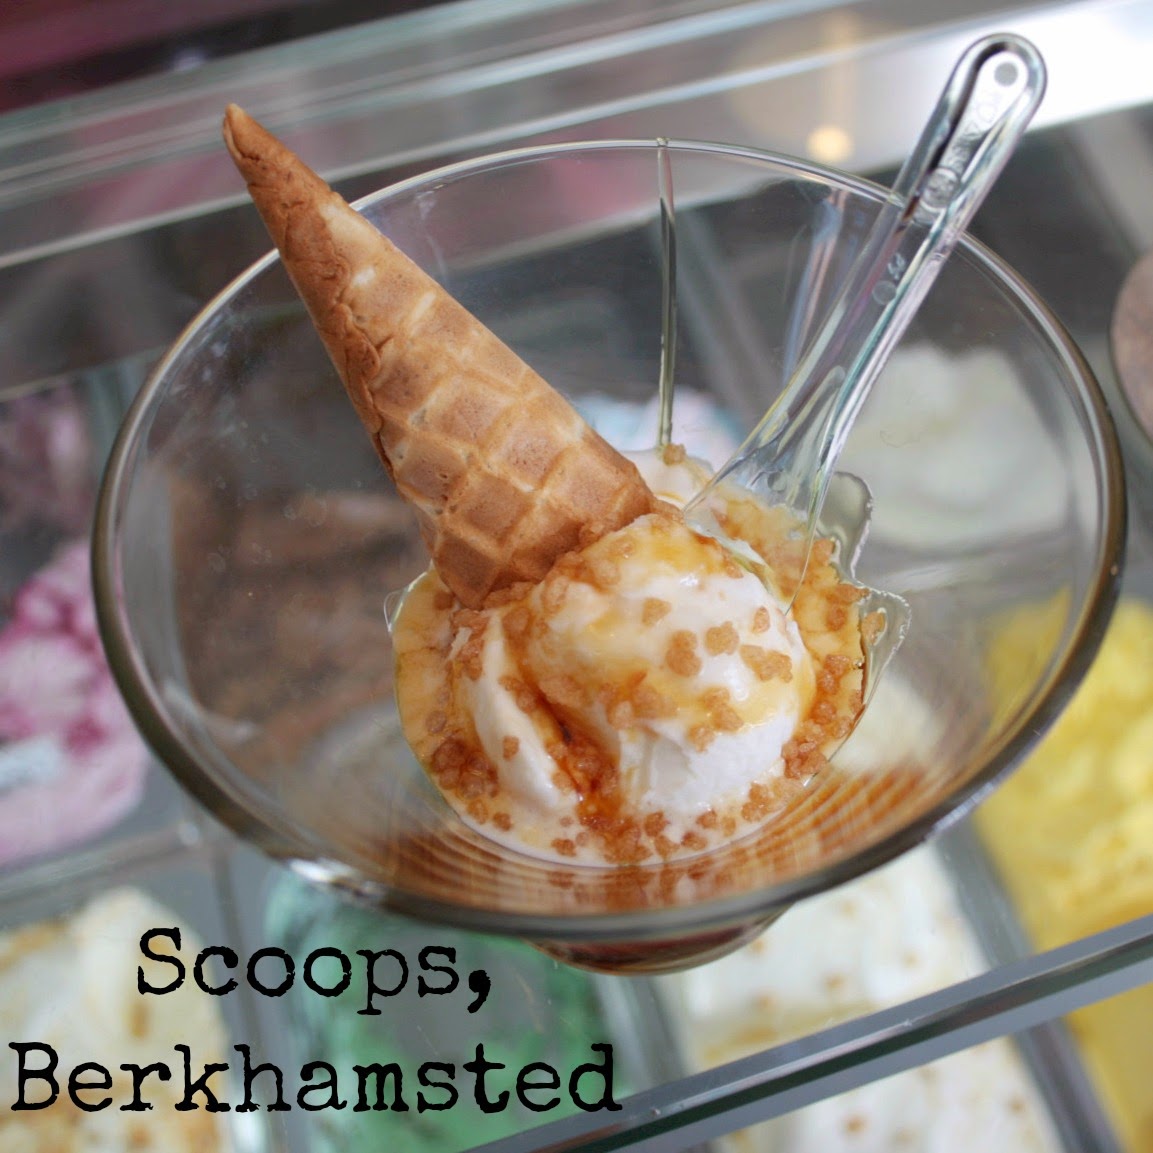 What better way to start a sunny Easter Bank Holiday that visiting your local gelato shop?  Here's all about by visit to Scoops, located right in the heart of the Berkhamsted high street!